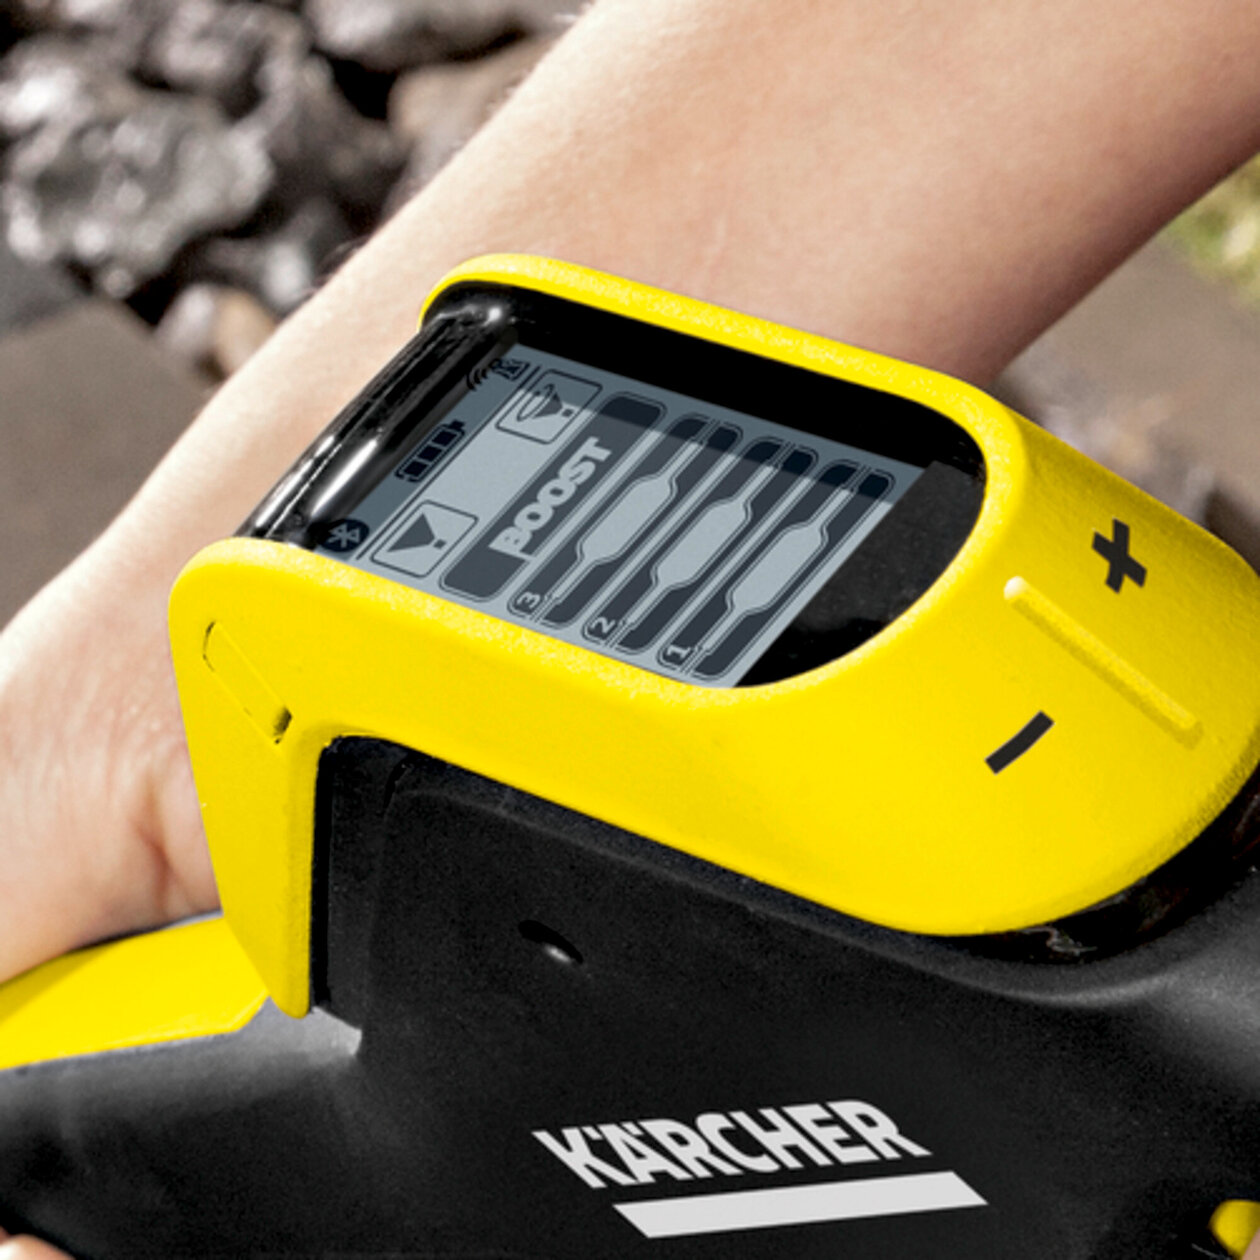 High pressure washer K 7 Premium Smart Control: Boost mode for additional power in your fight against dirt